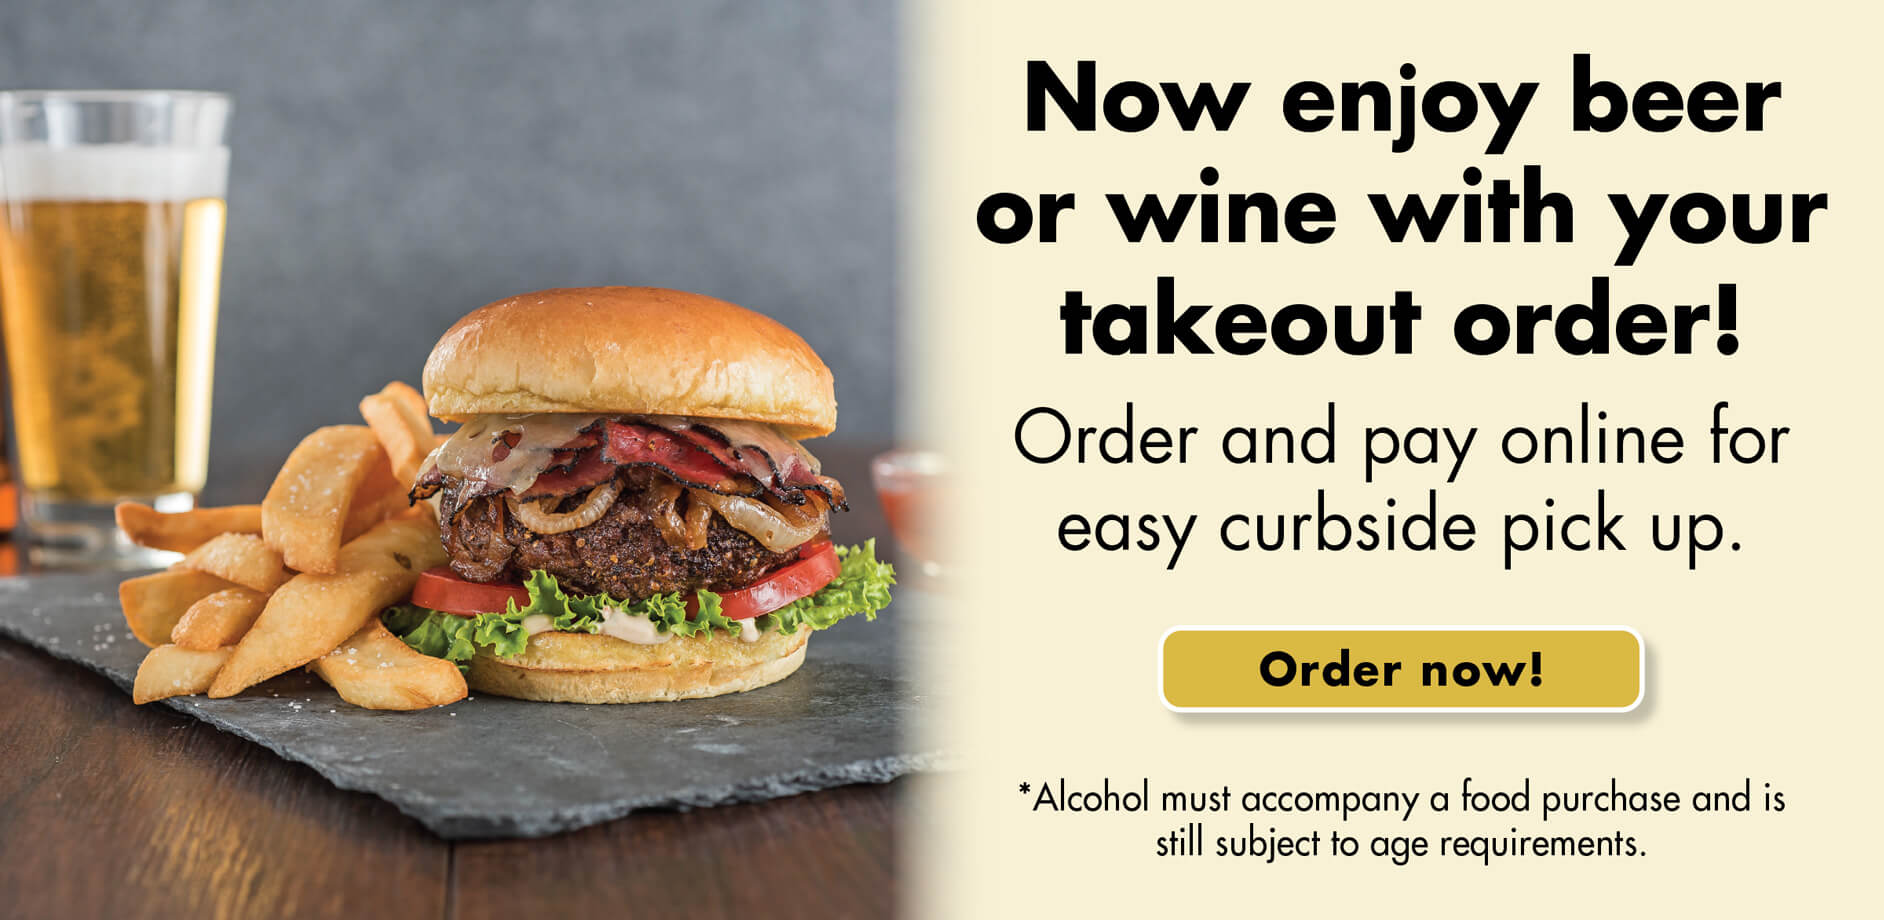 Now enjoy beer or wine with your takeout order! Order and pay online for easy curbside pick up. Order now! * Alcohol must accompany a food purchase and is still subject to age requirements.